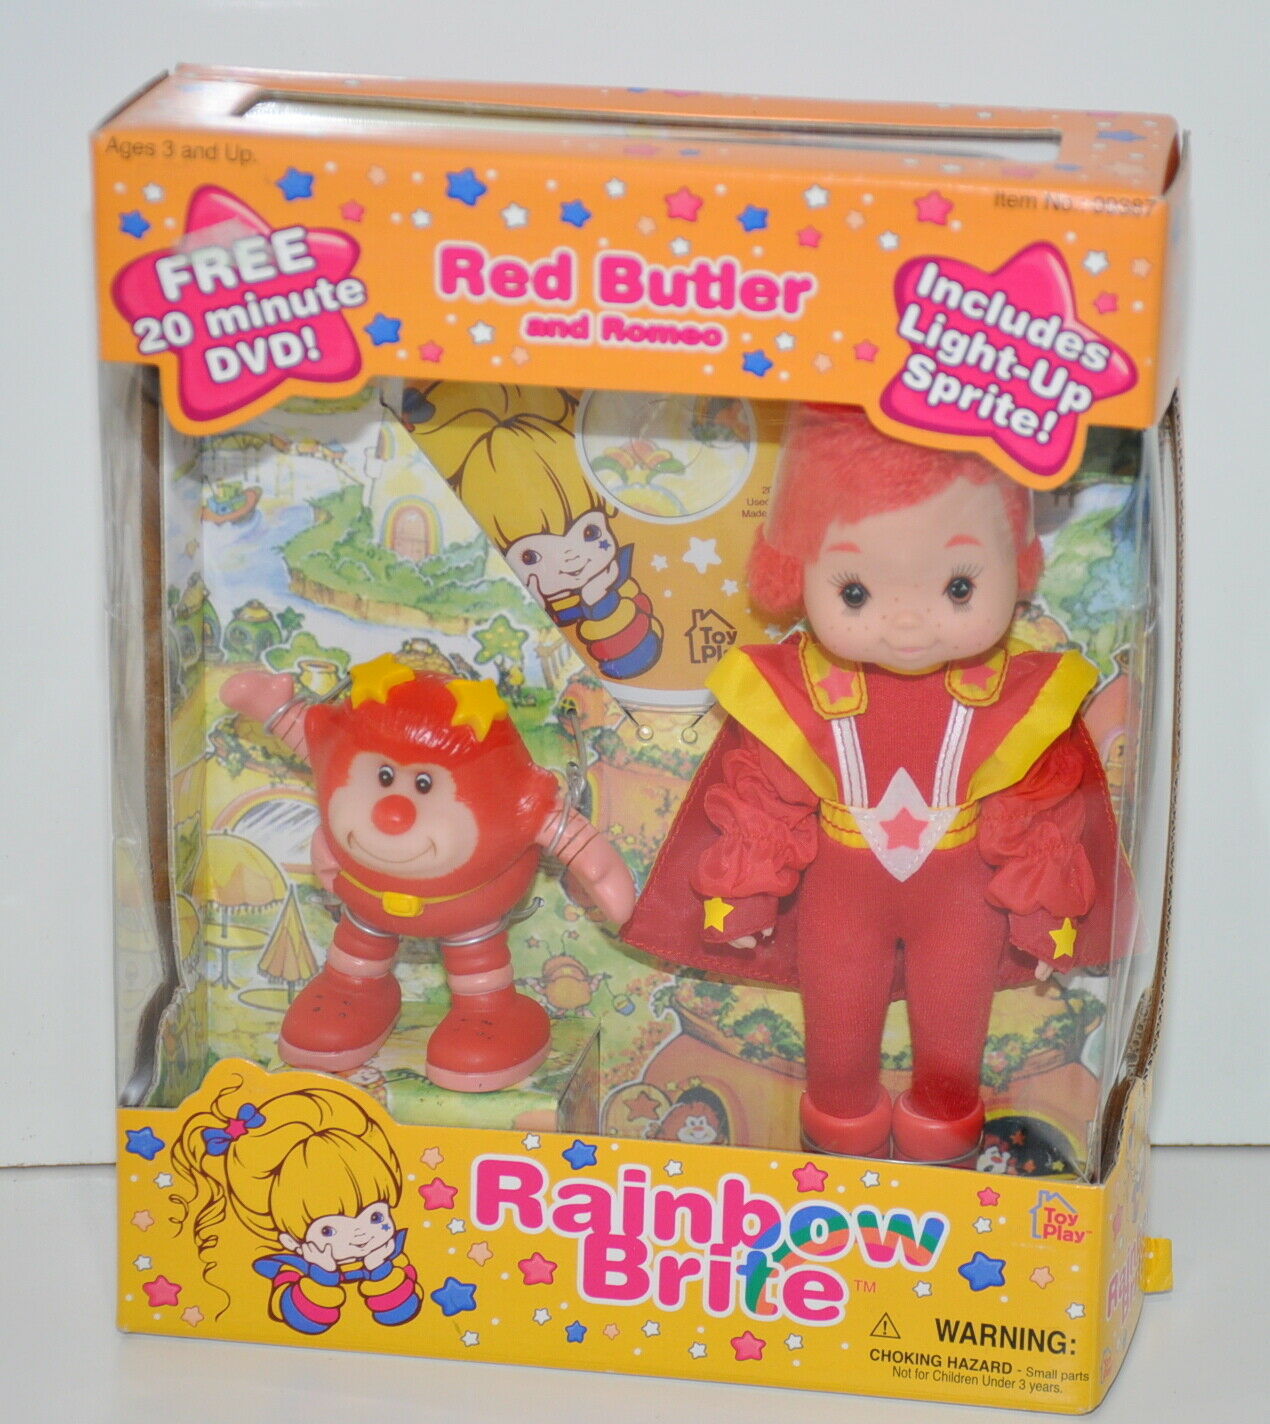 Rainbow Brite Red Butler And Romeo Light Up Sprite Figure Dvd 2003 New